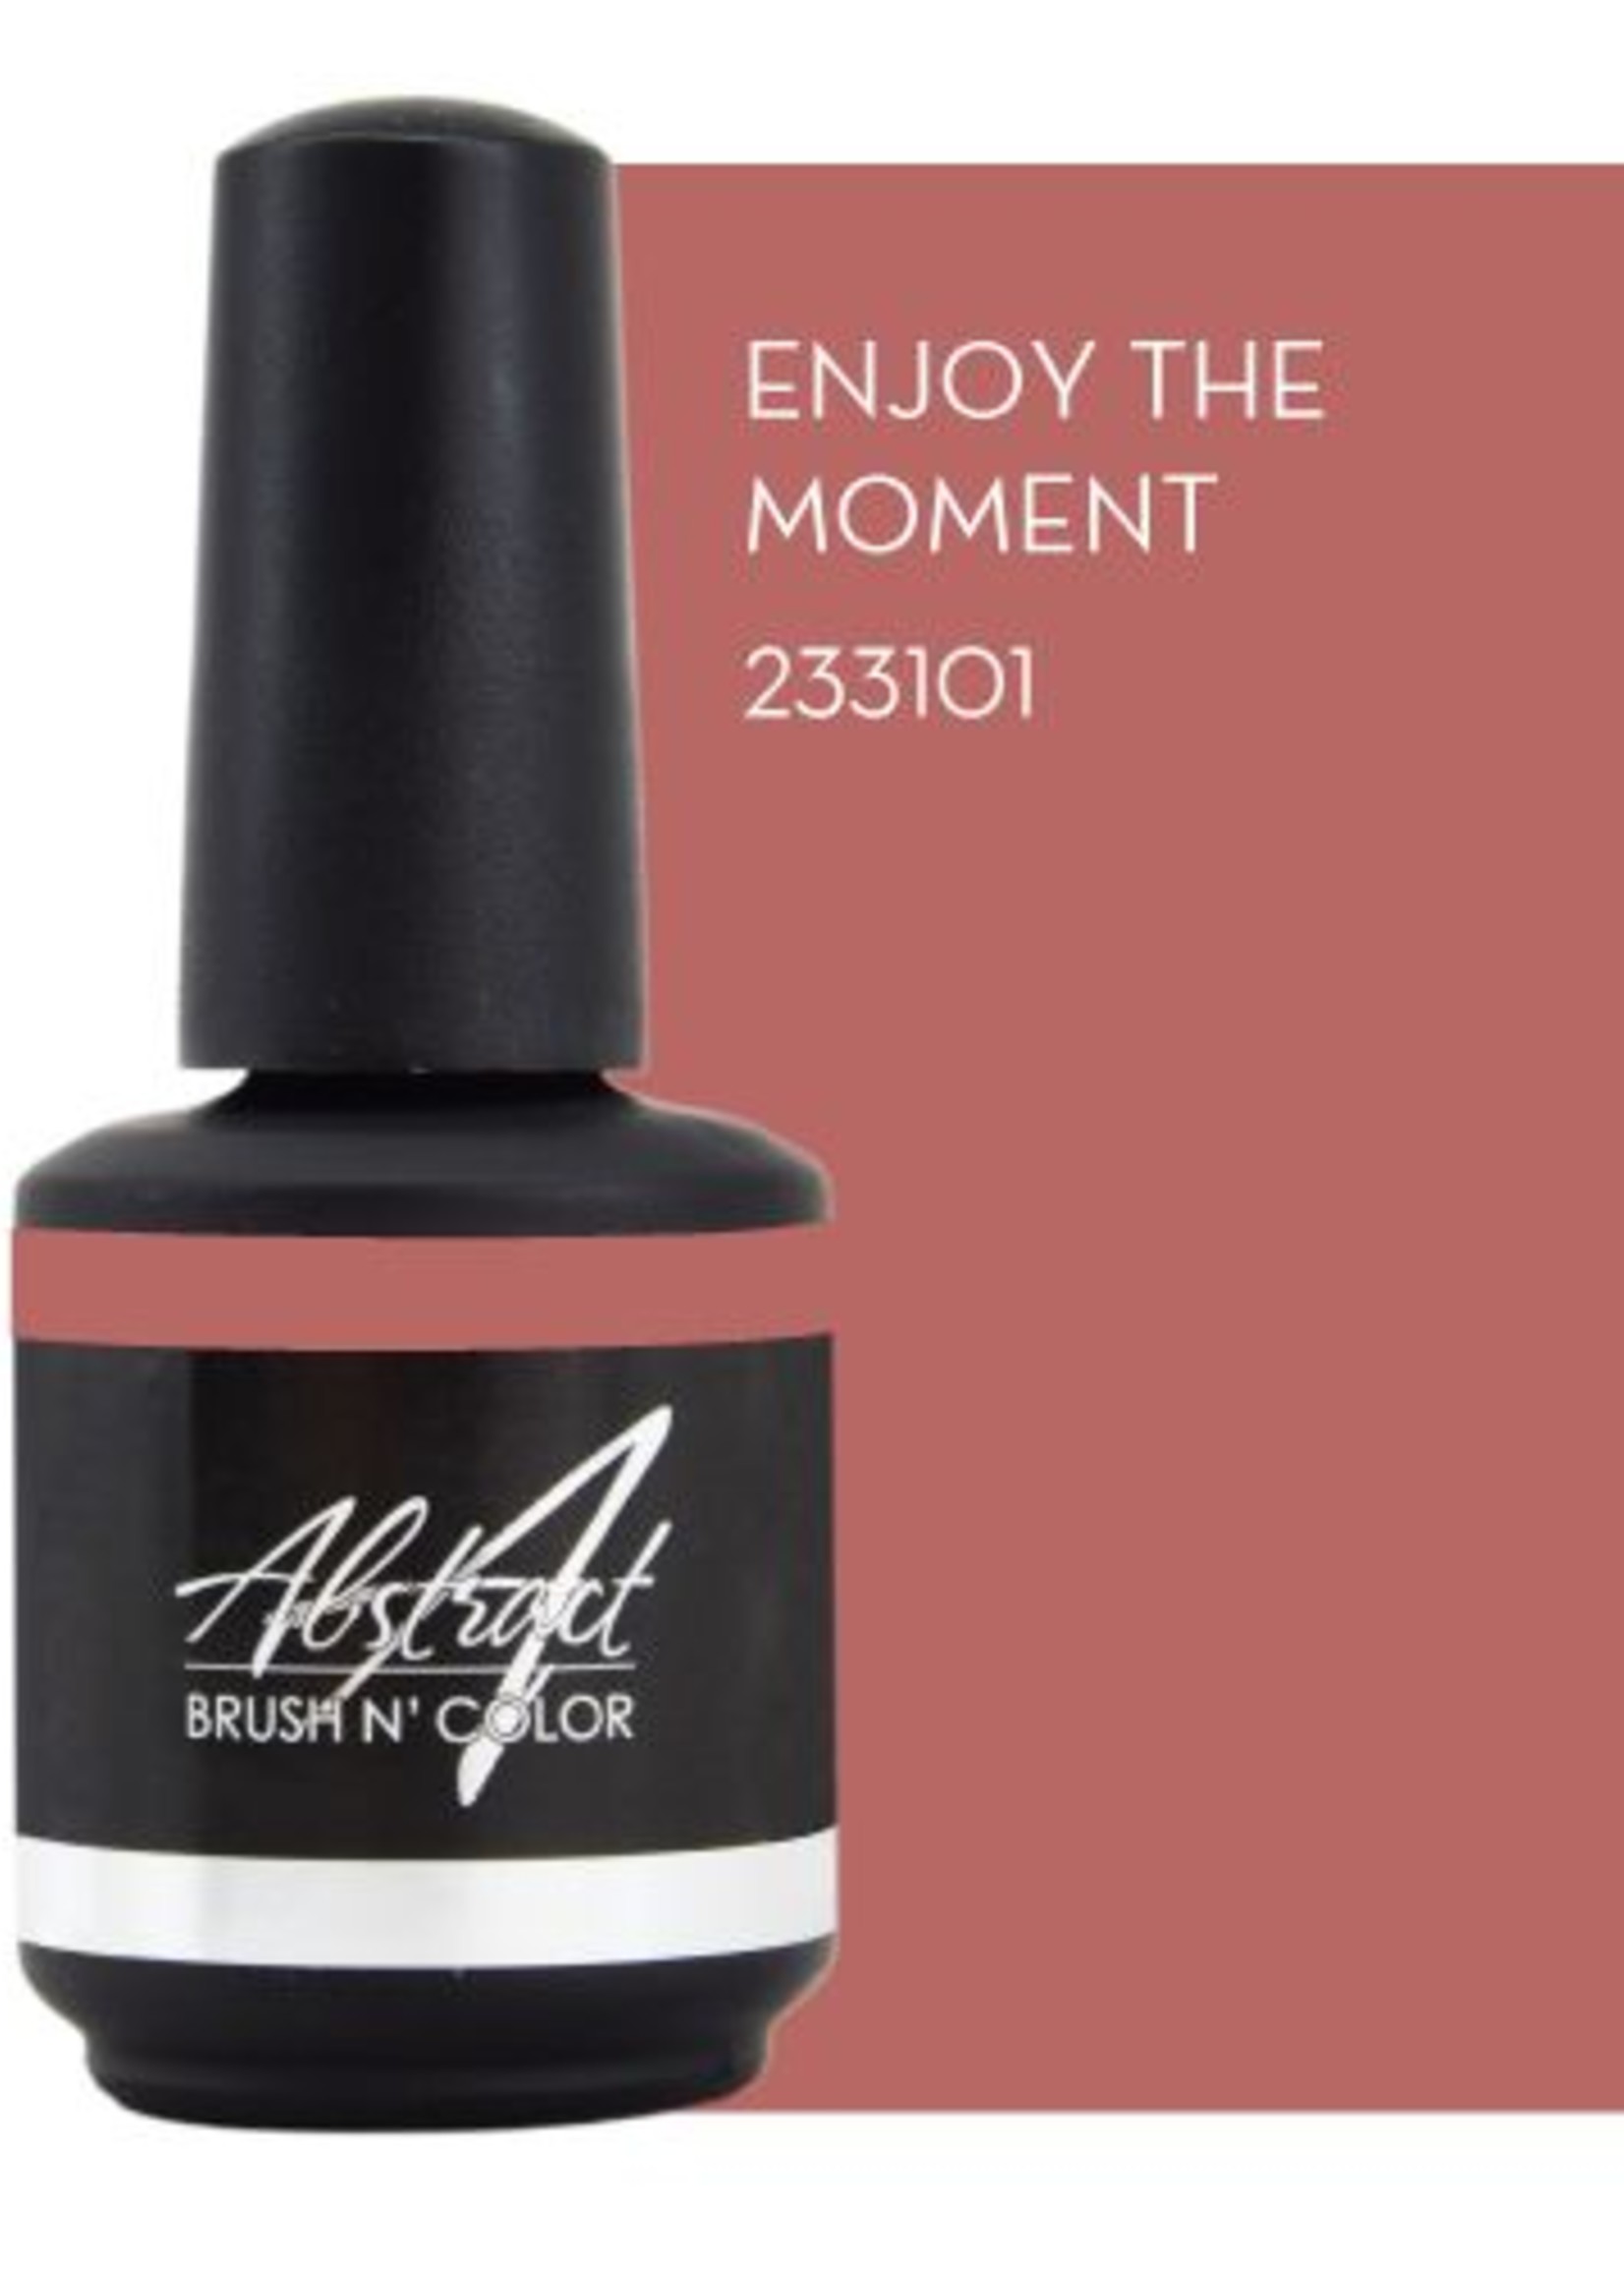 Abstract® Brush N' Color 15 ml Enjoy The Moment